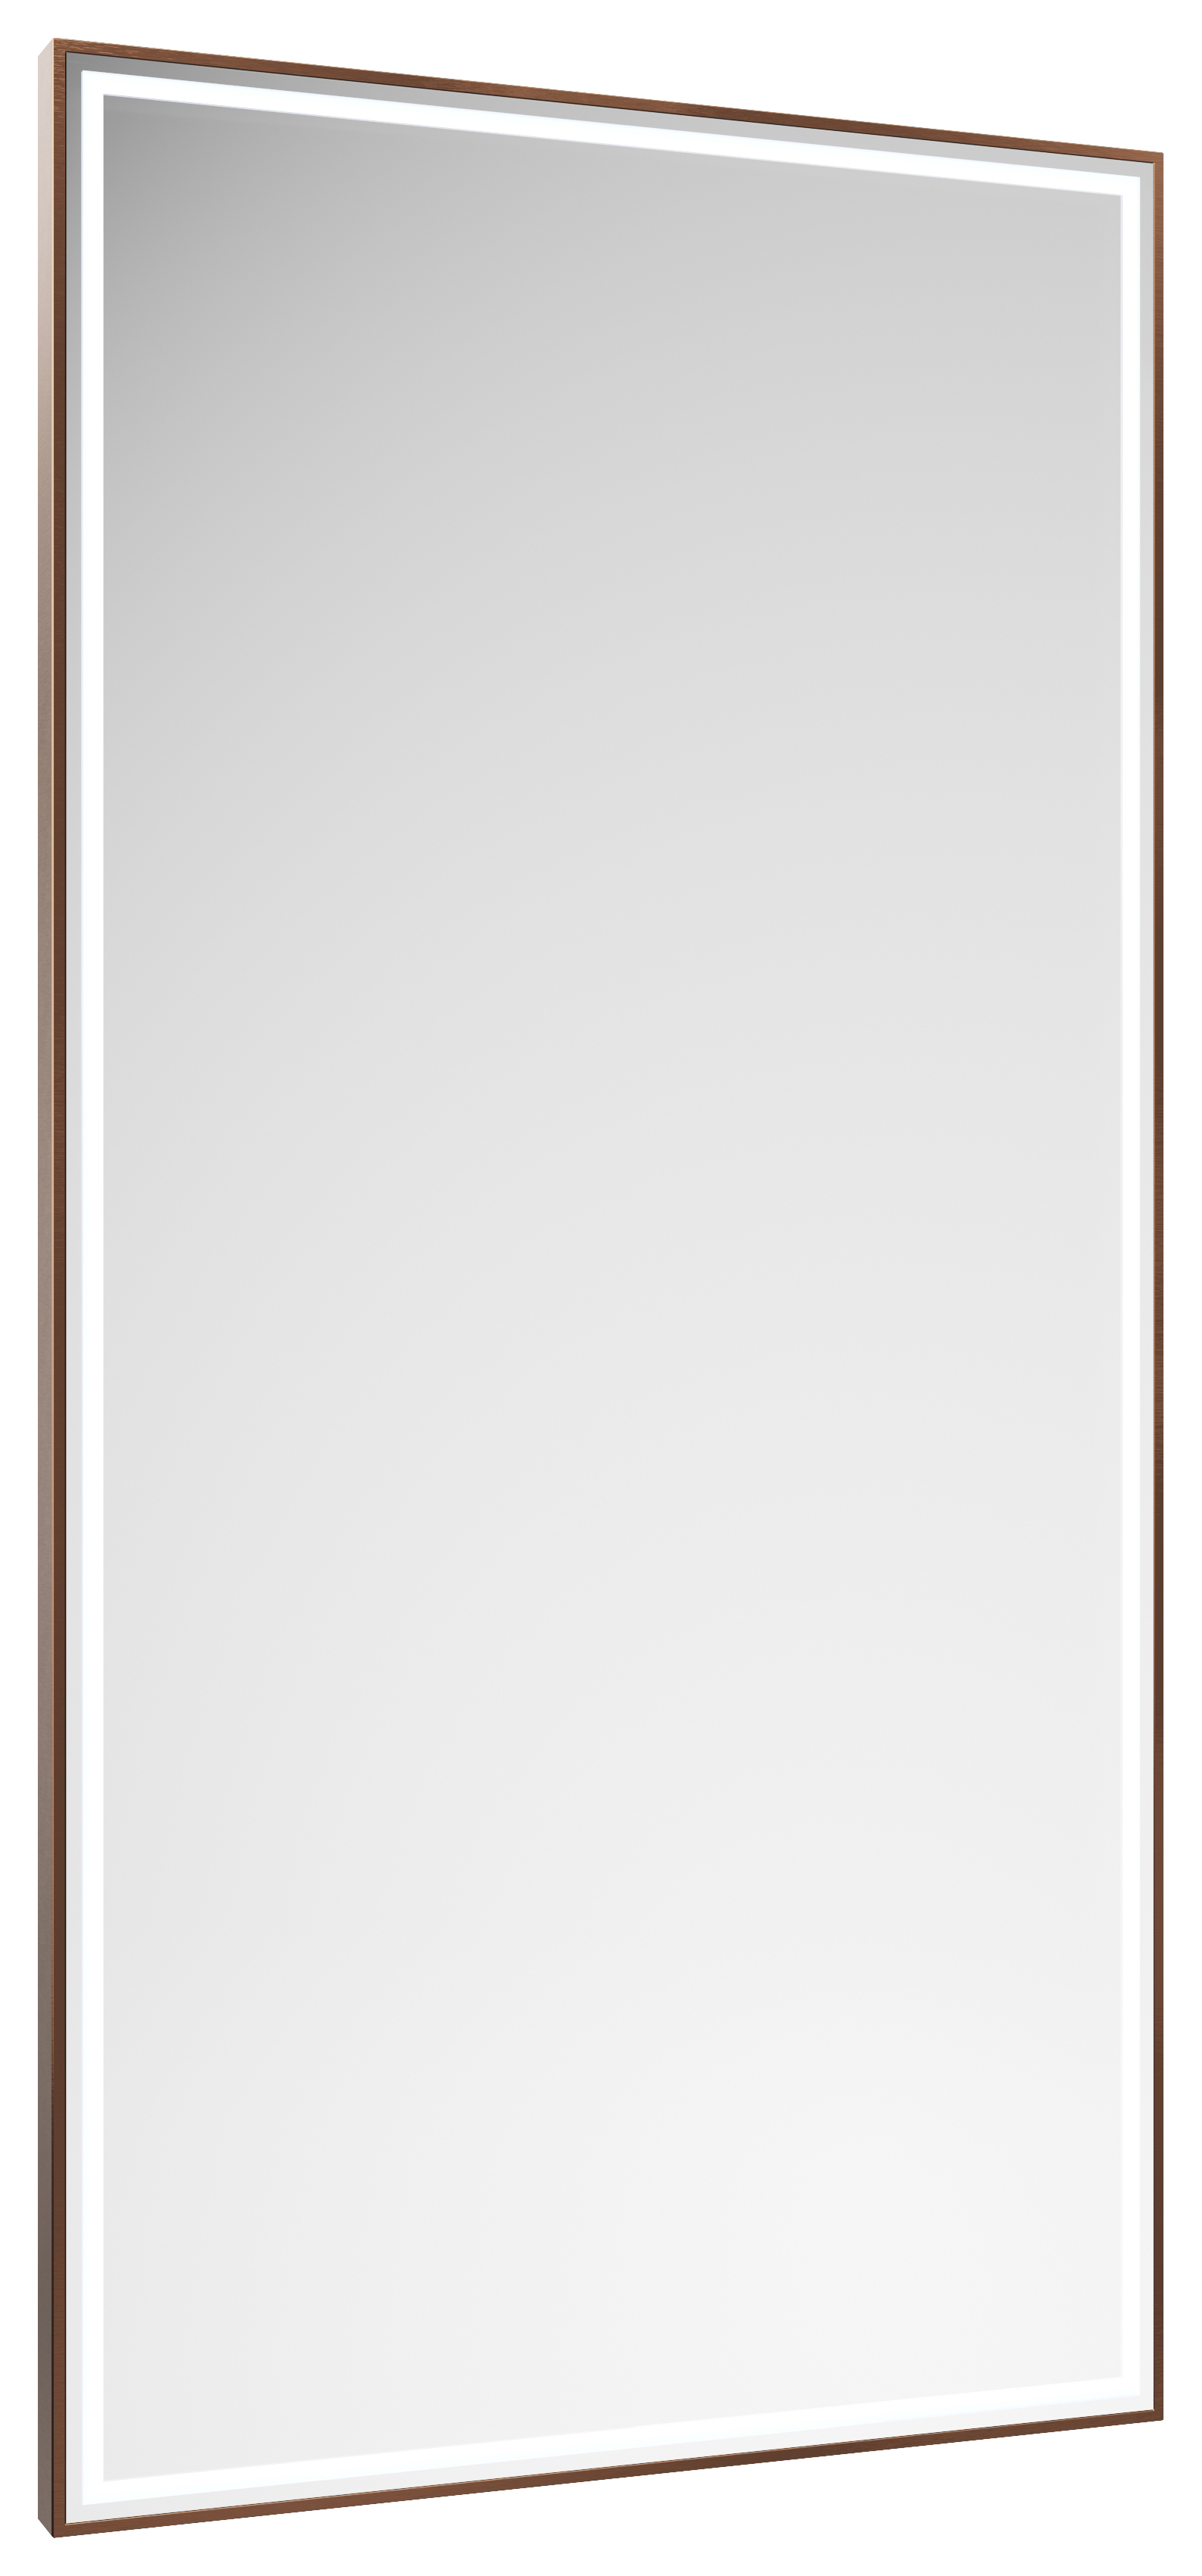 Image of Abacus Melford Bronze LED Mirror with Demister - 800 x 500mm